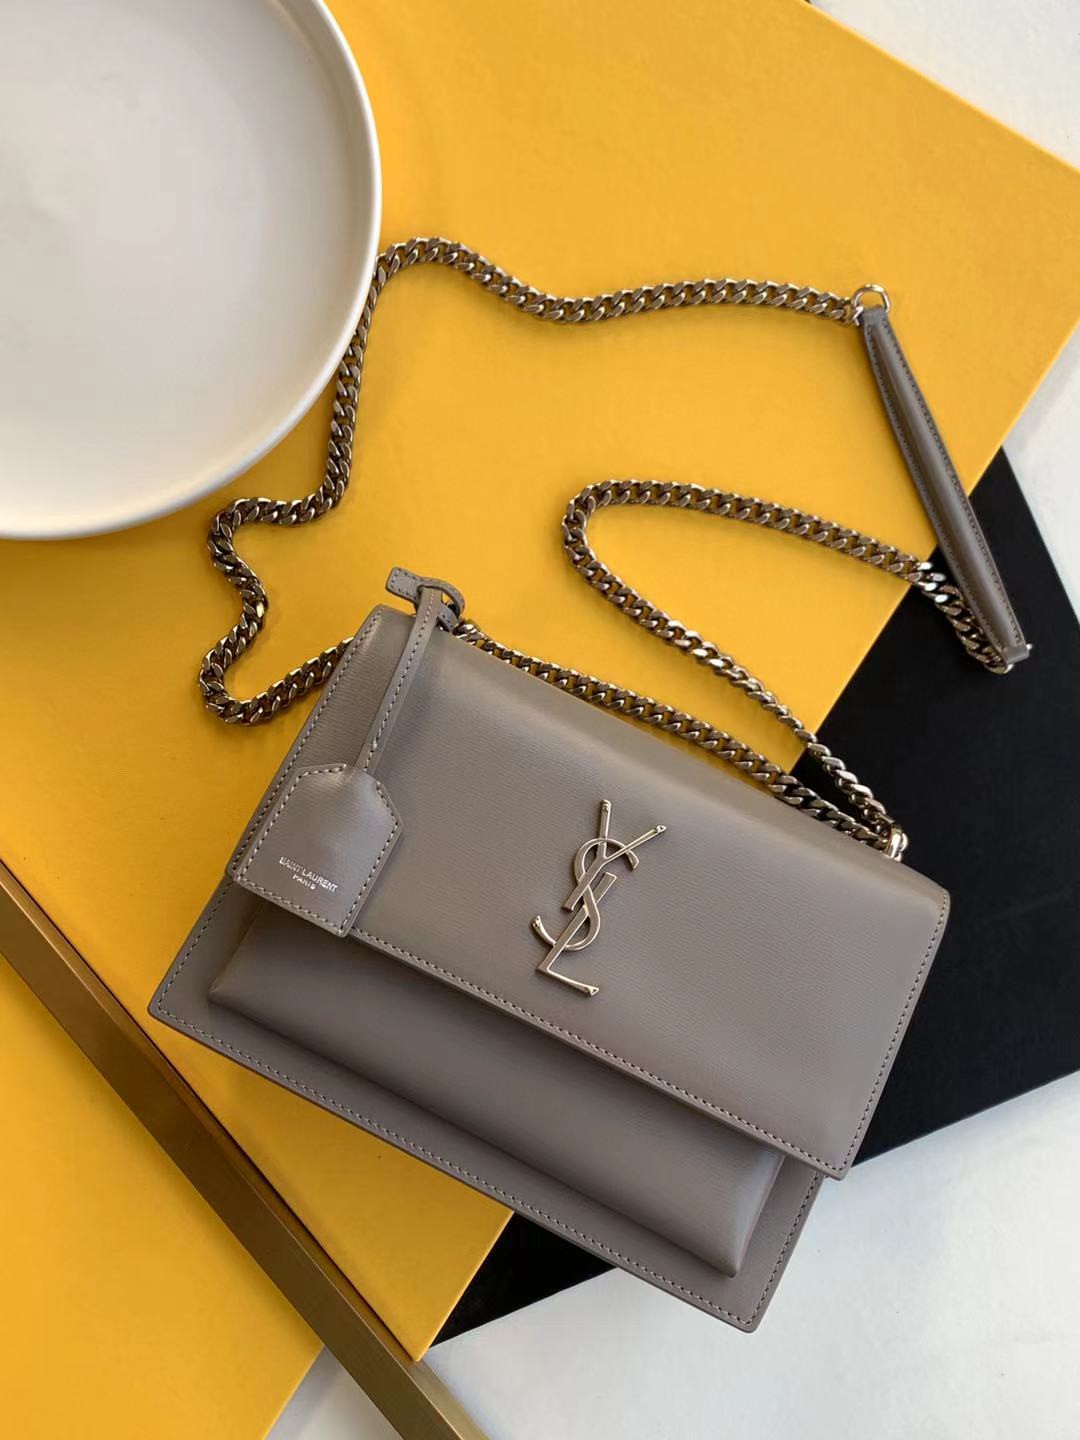 2021 cheap Saint Laurent Sunset bag in grey smooth leather